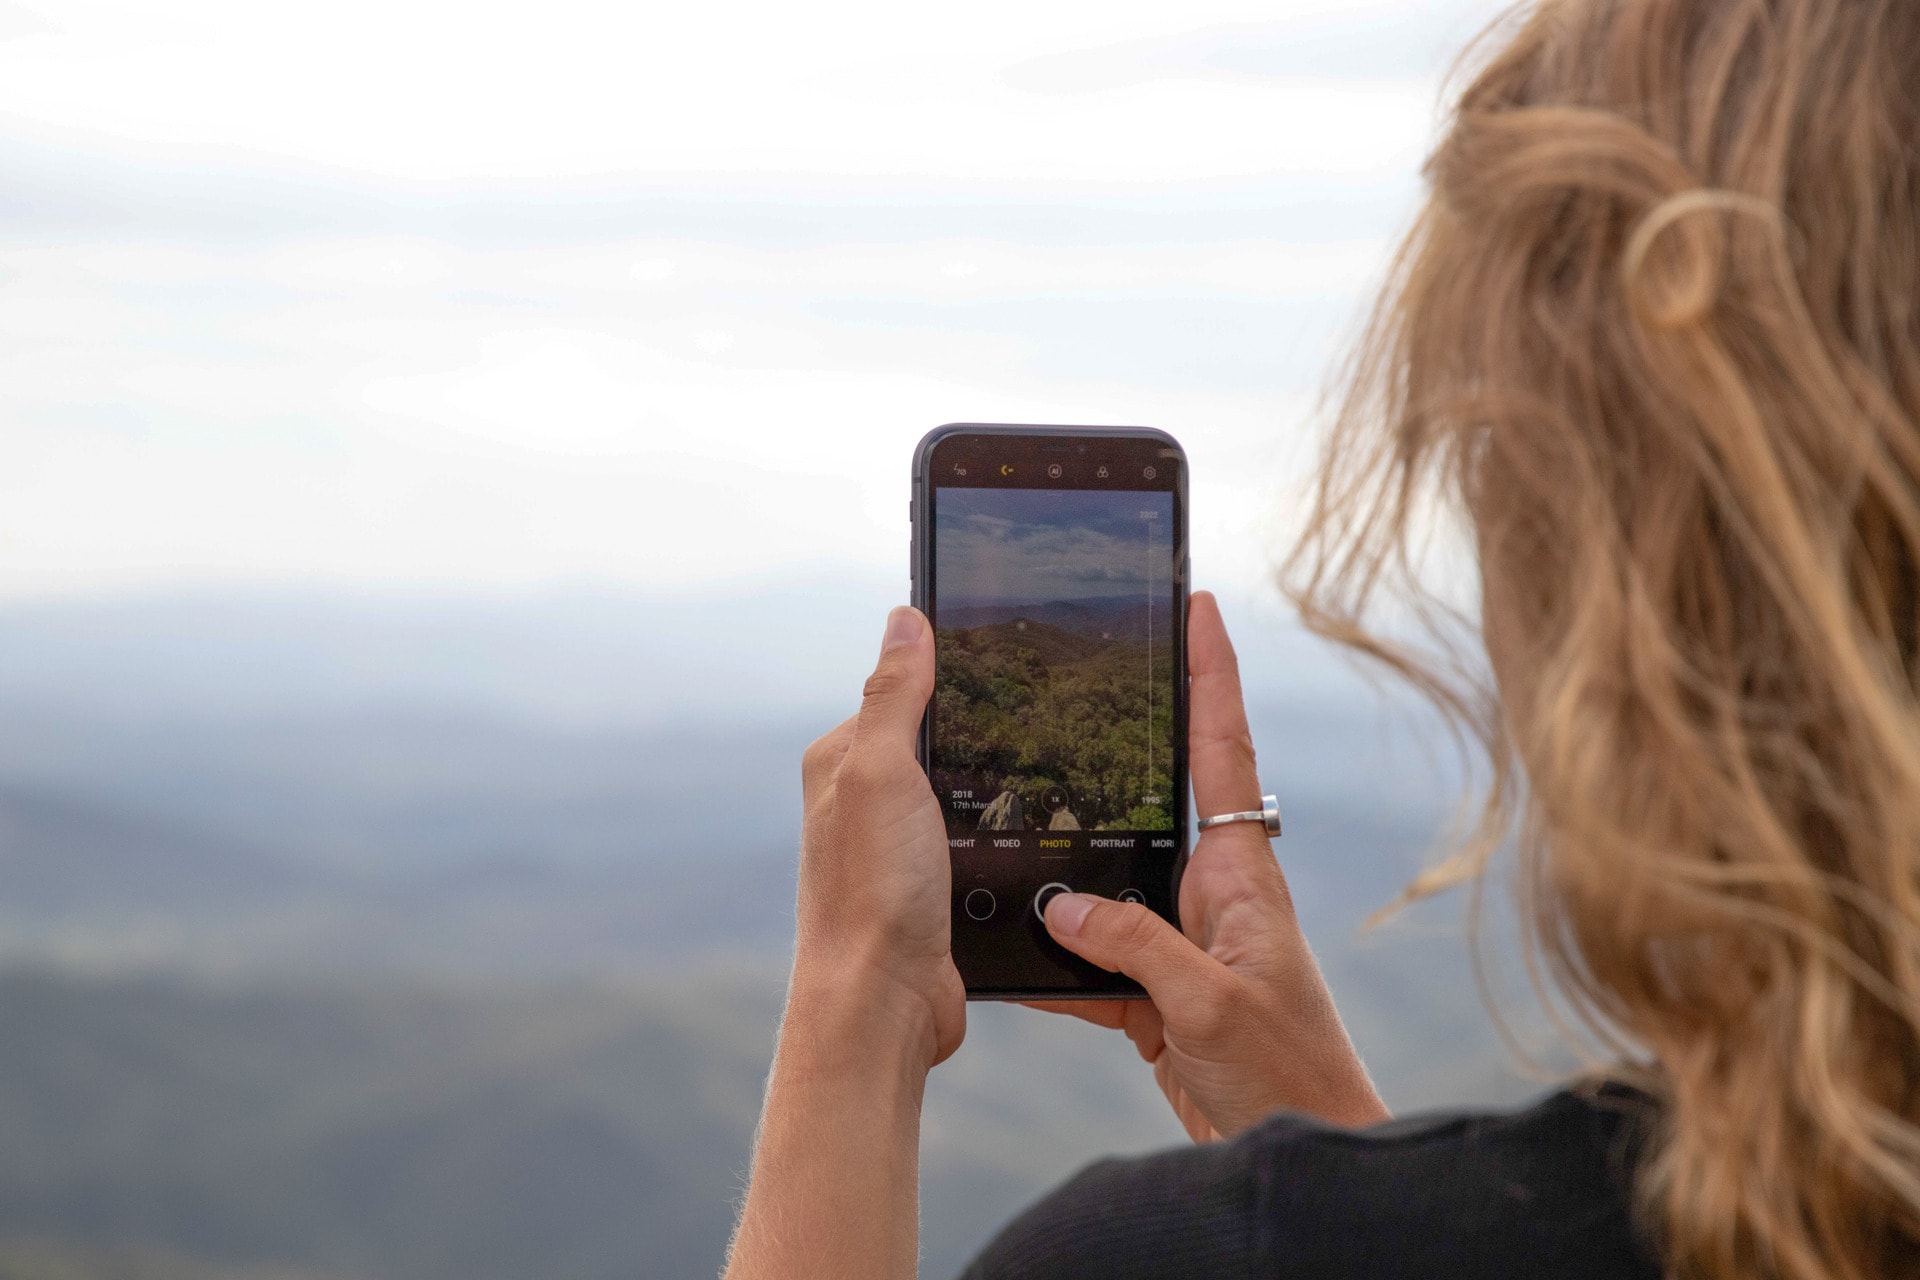 Girl taking a picture of a landscape with c-earth visible on the screen